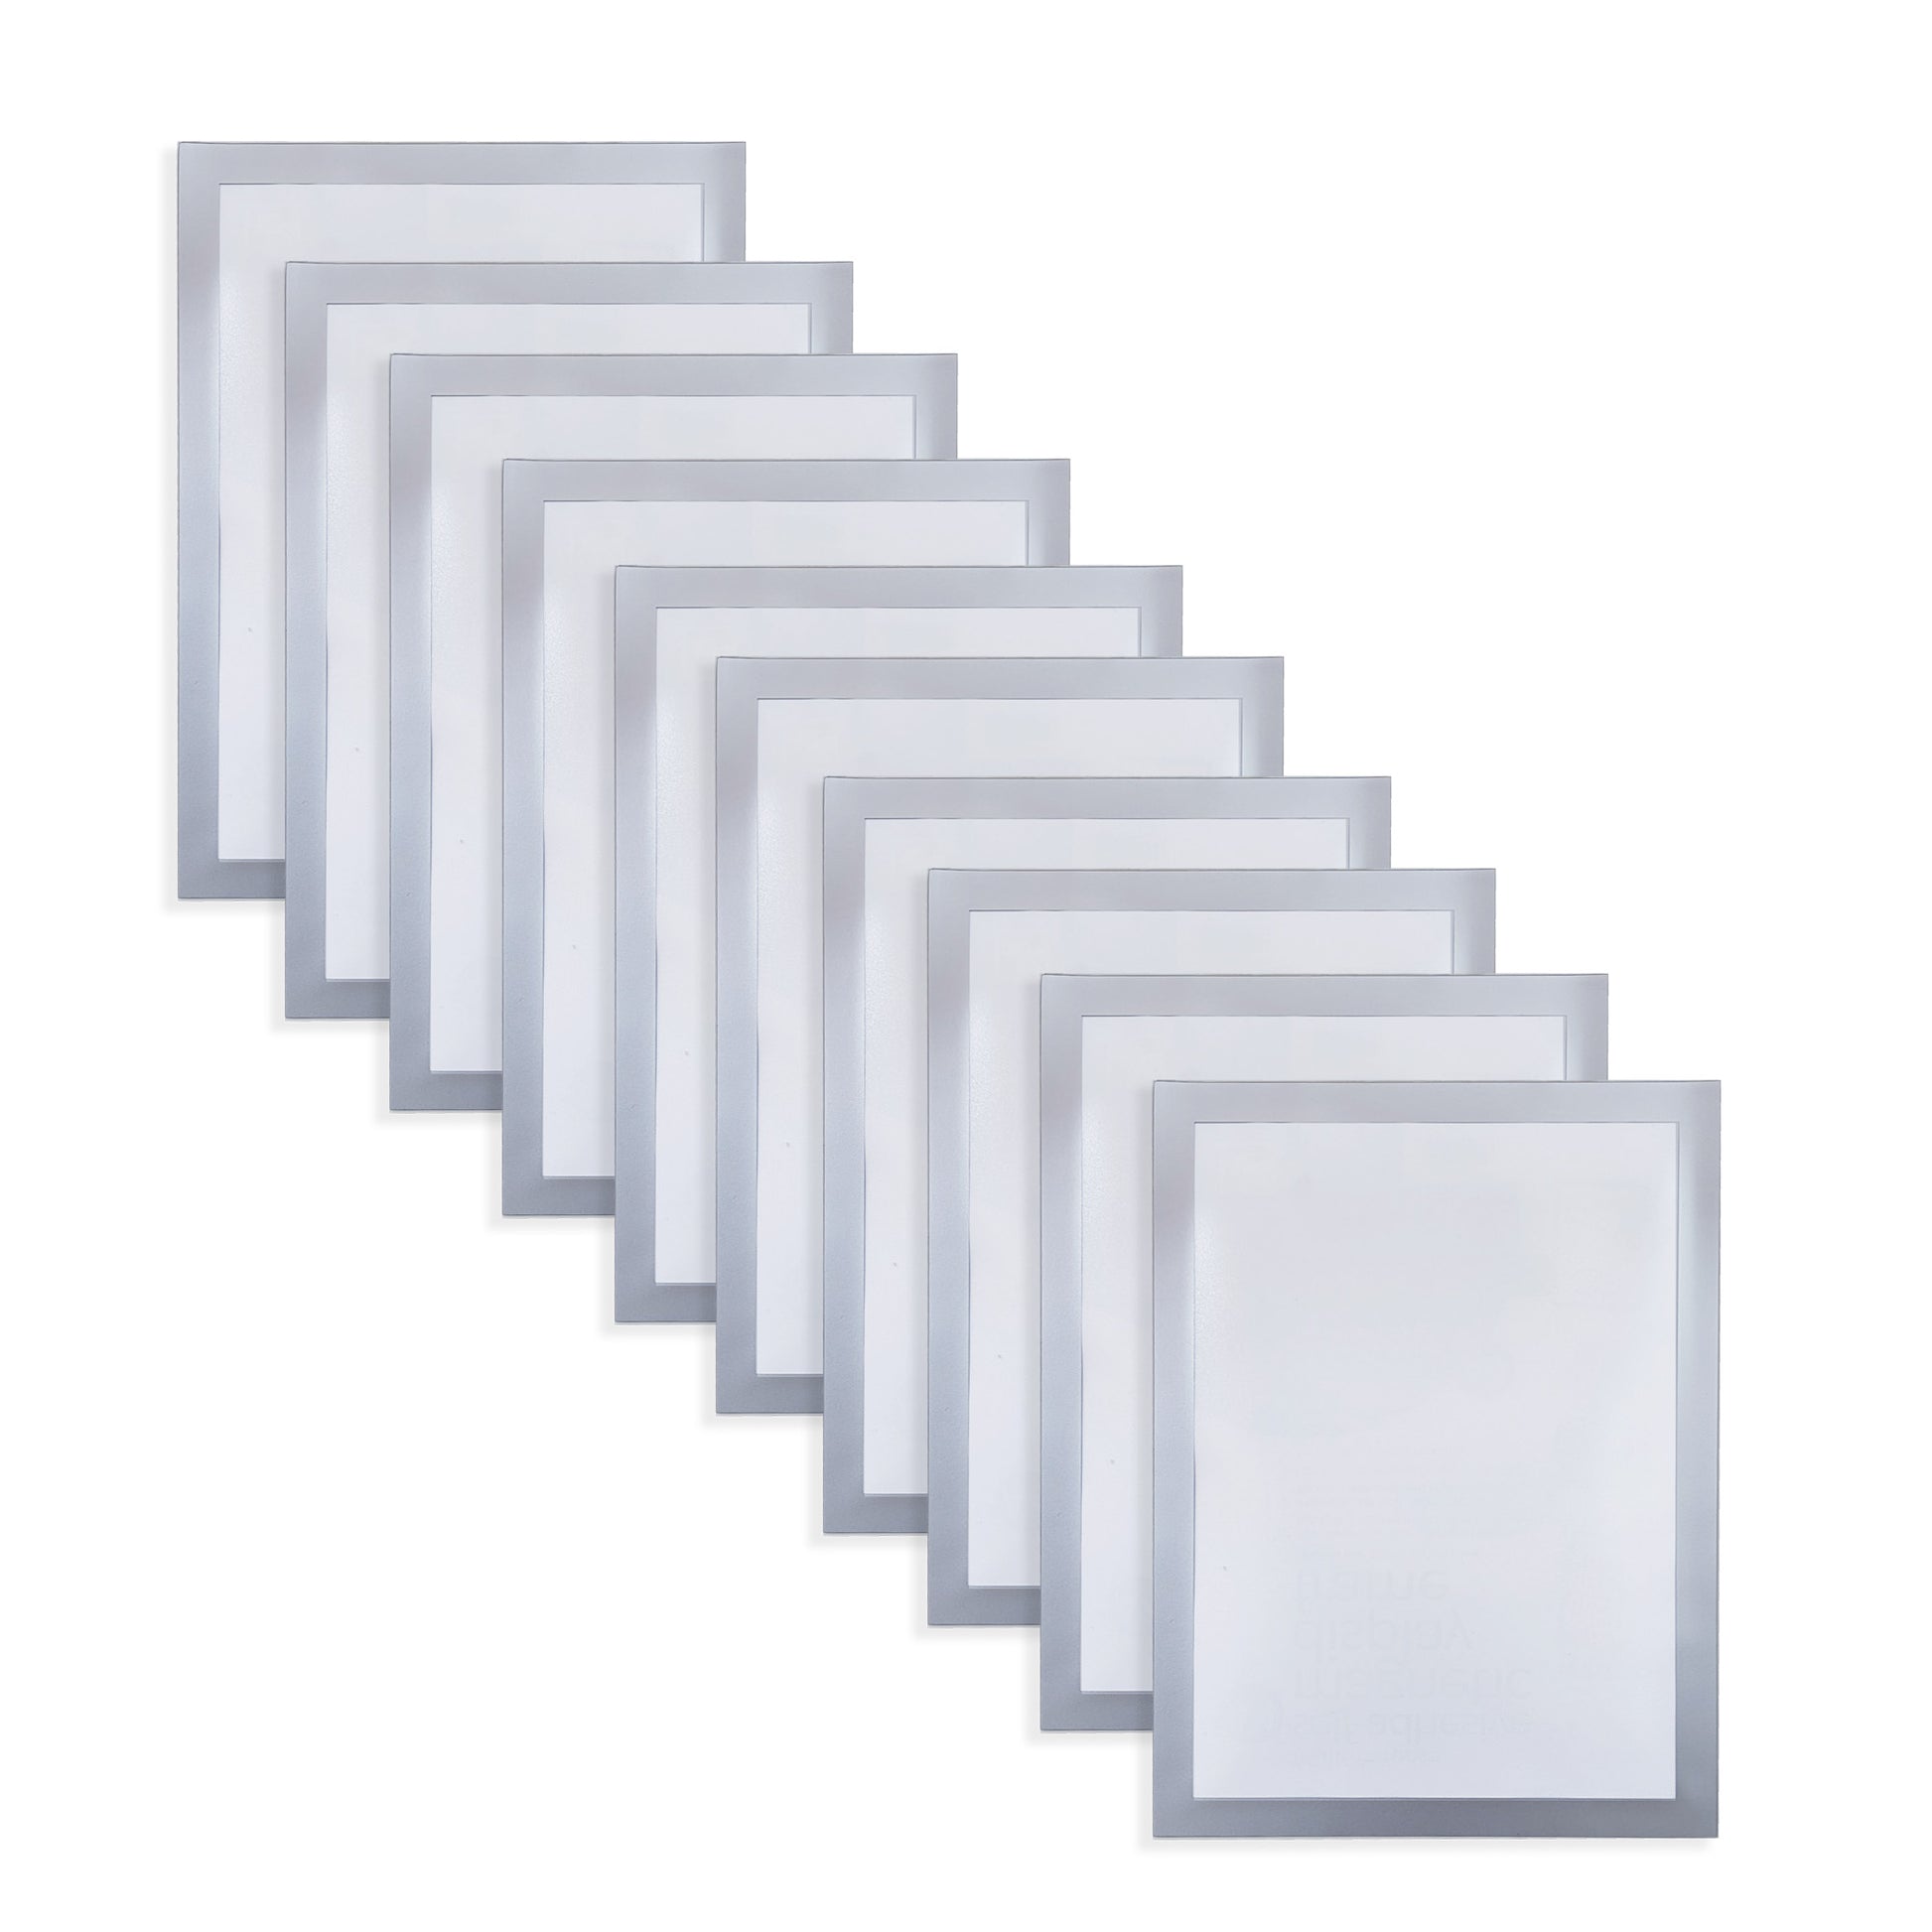 A stack of ten A4 self-adhesive magnetic display frames with translucent center and silver borders, displayed in a fan arrangement to show the multiple units included in the package.